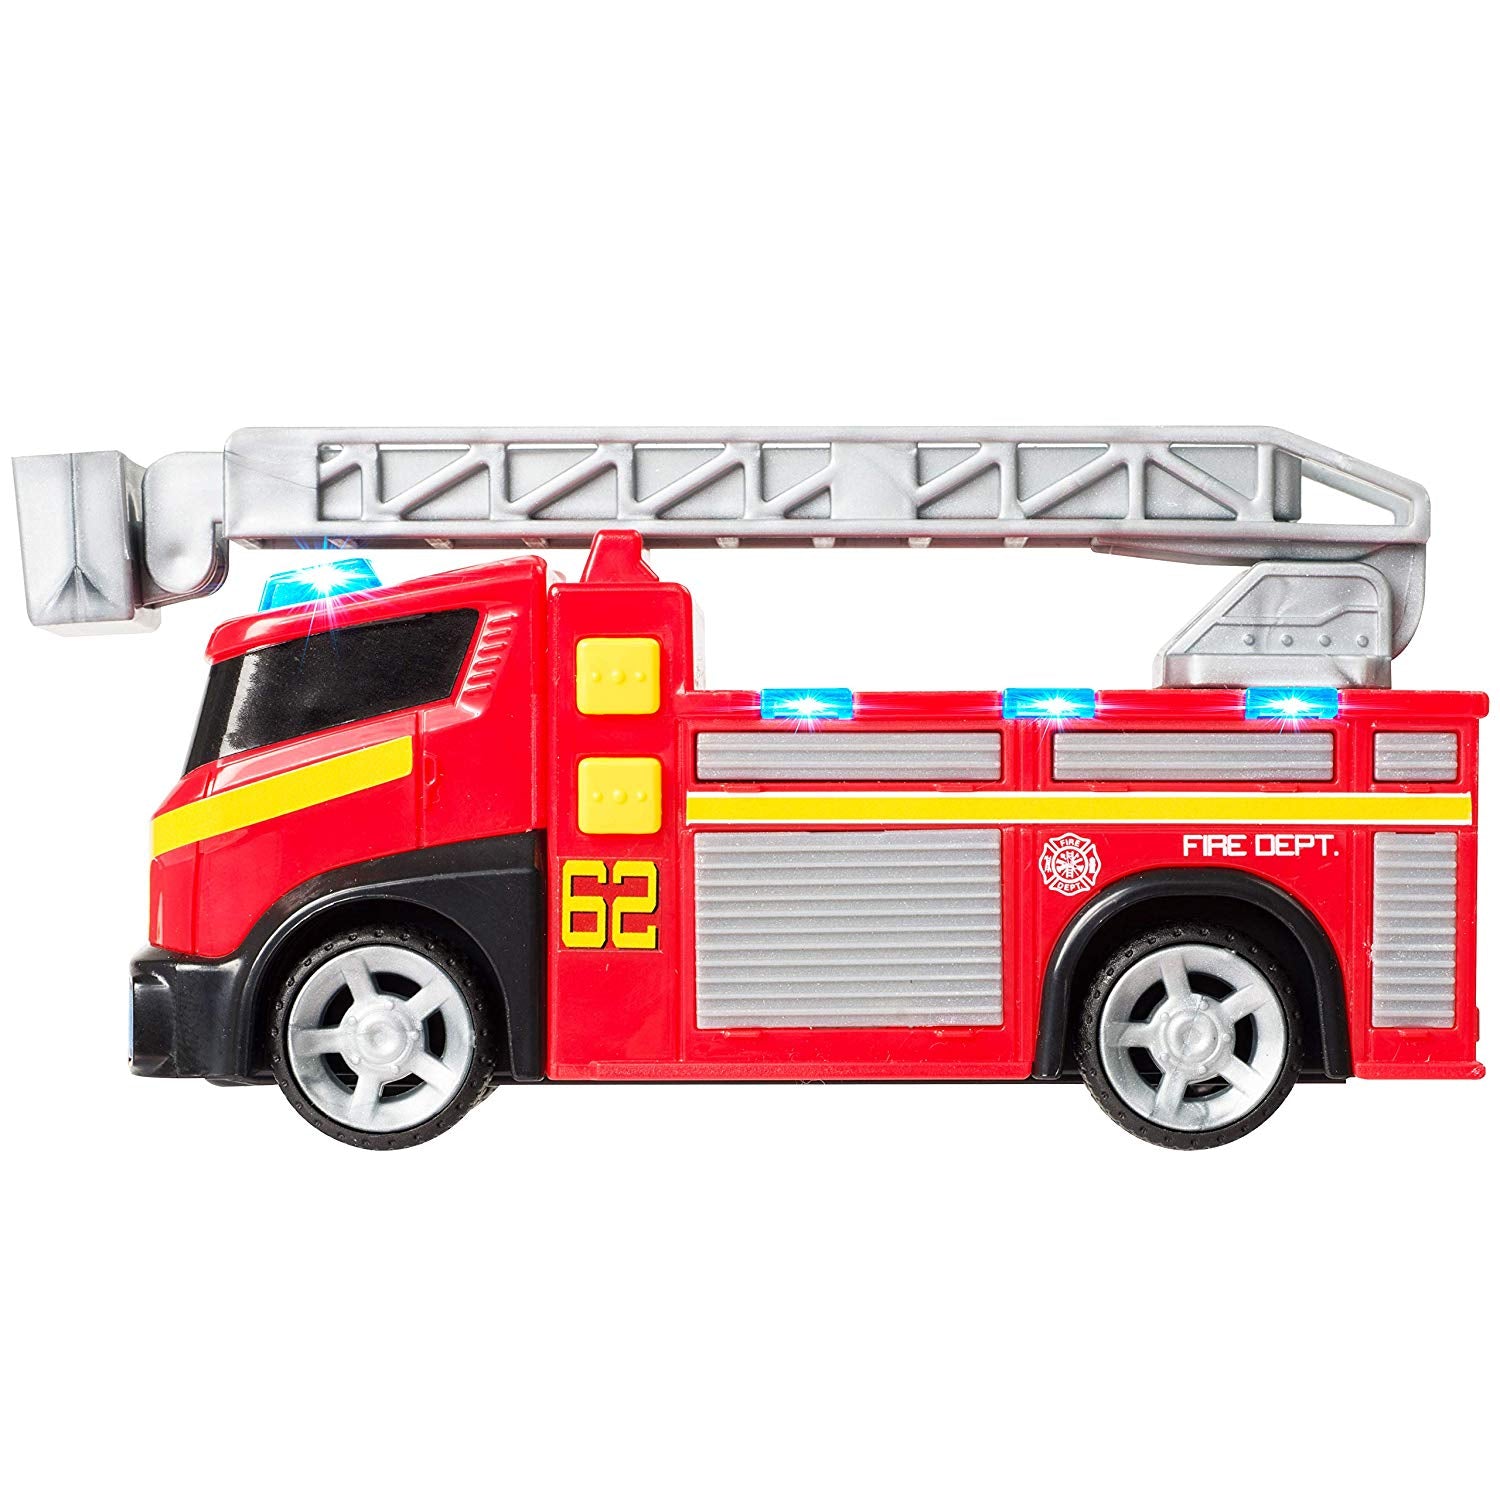 HTI Teamsterz Small Light & Sound Fire Engine